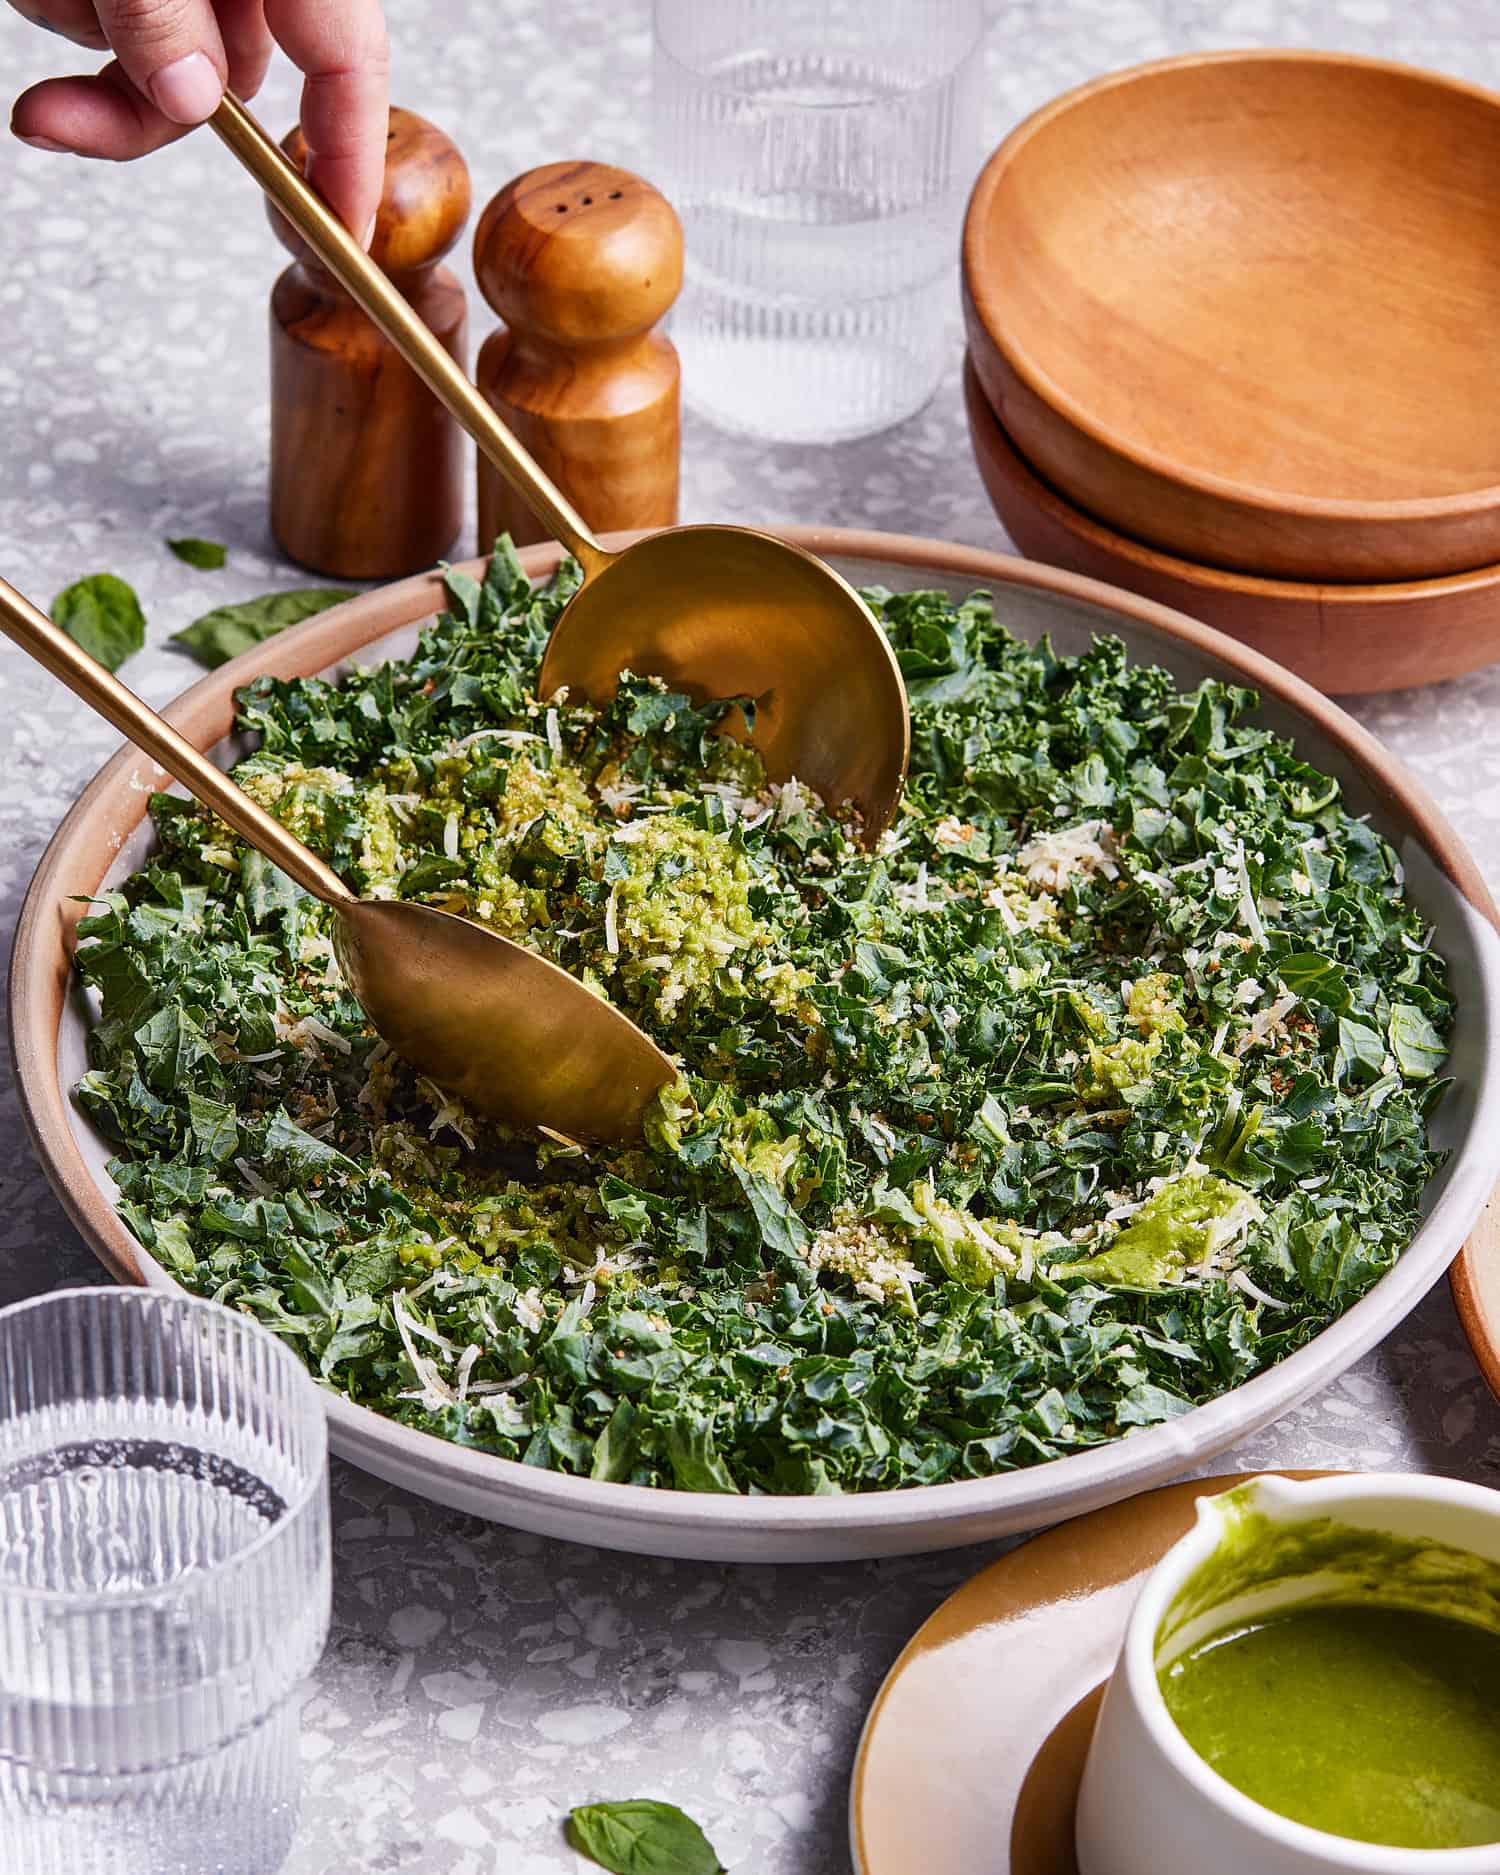 A bowl of the kale salad with lemon-basil dressing, sitting on a countertop with metal serving utensils resting in the bowl